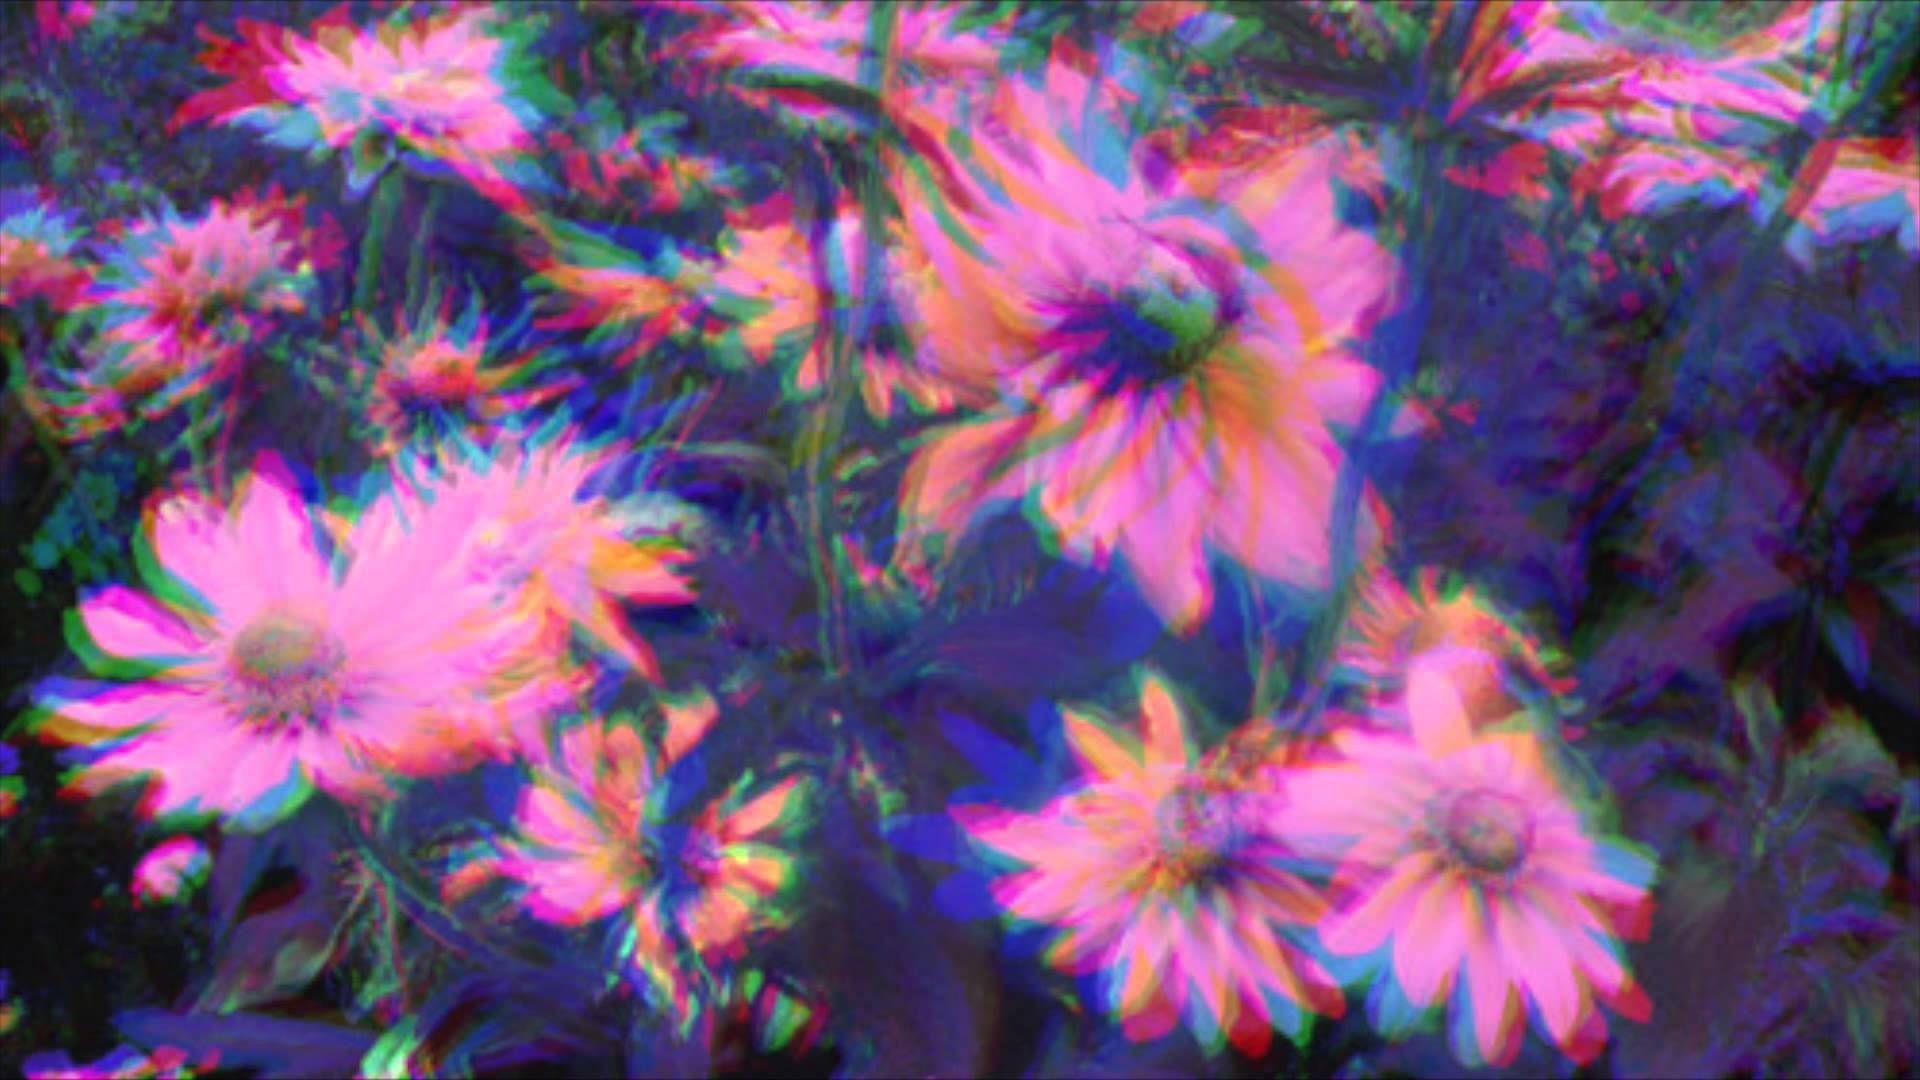 psychedelic twitter backgrounds